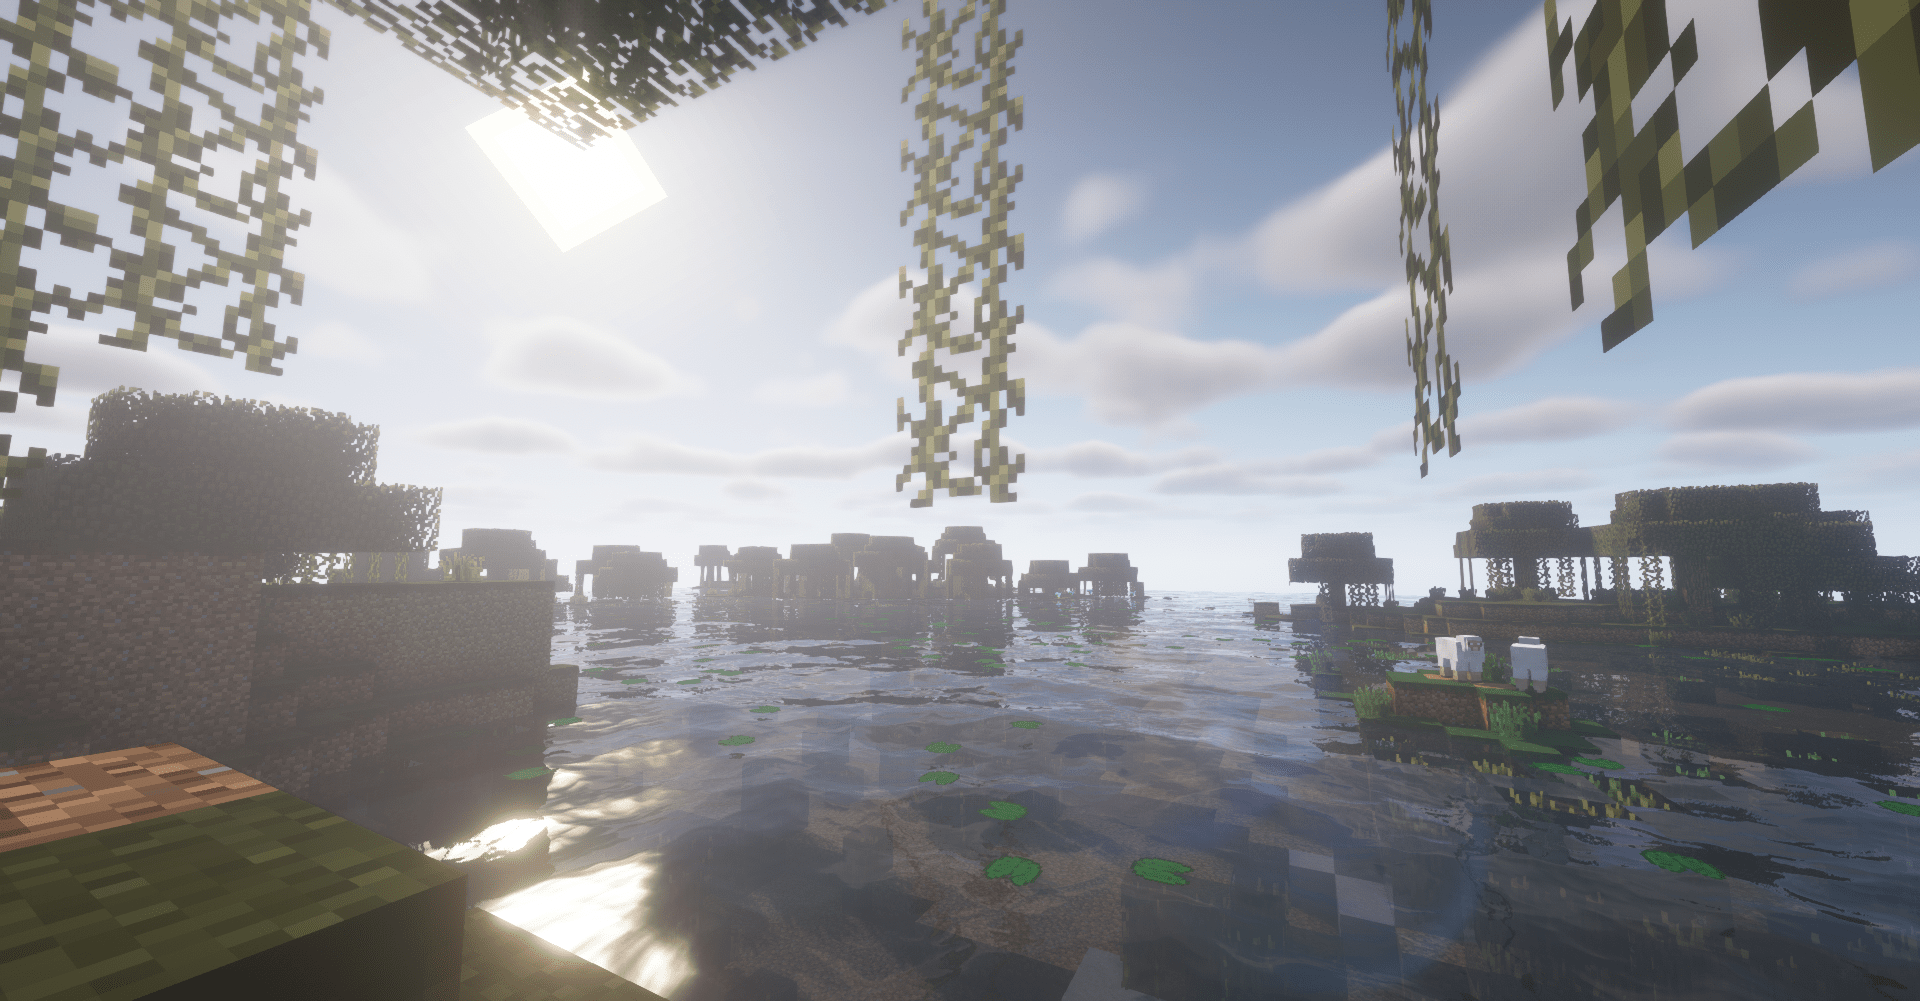 A Minecraft screenshot of a landscape with water, trees, and sky. - Minecraft